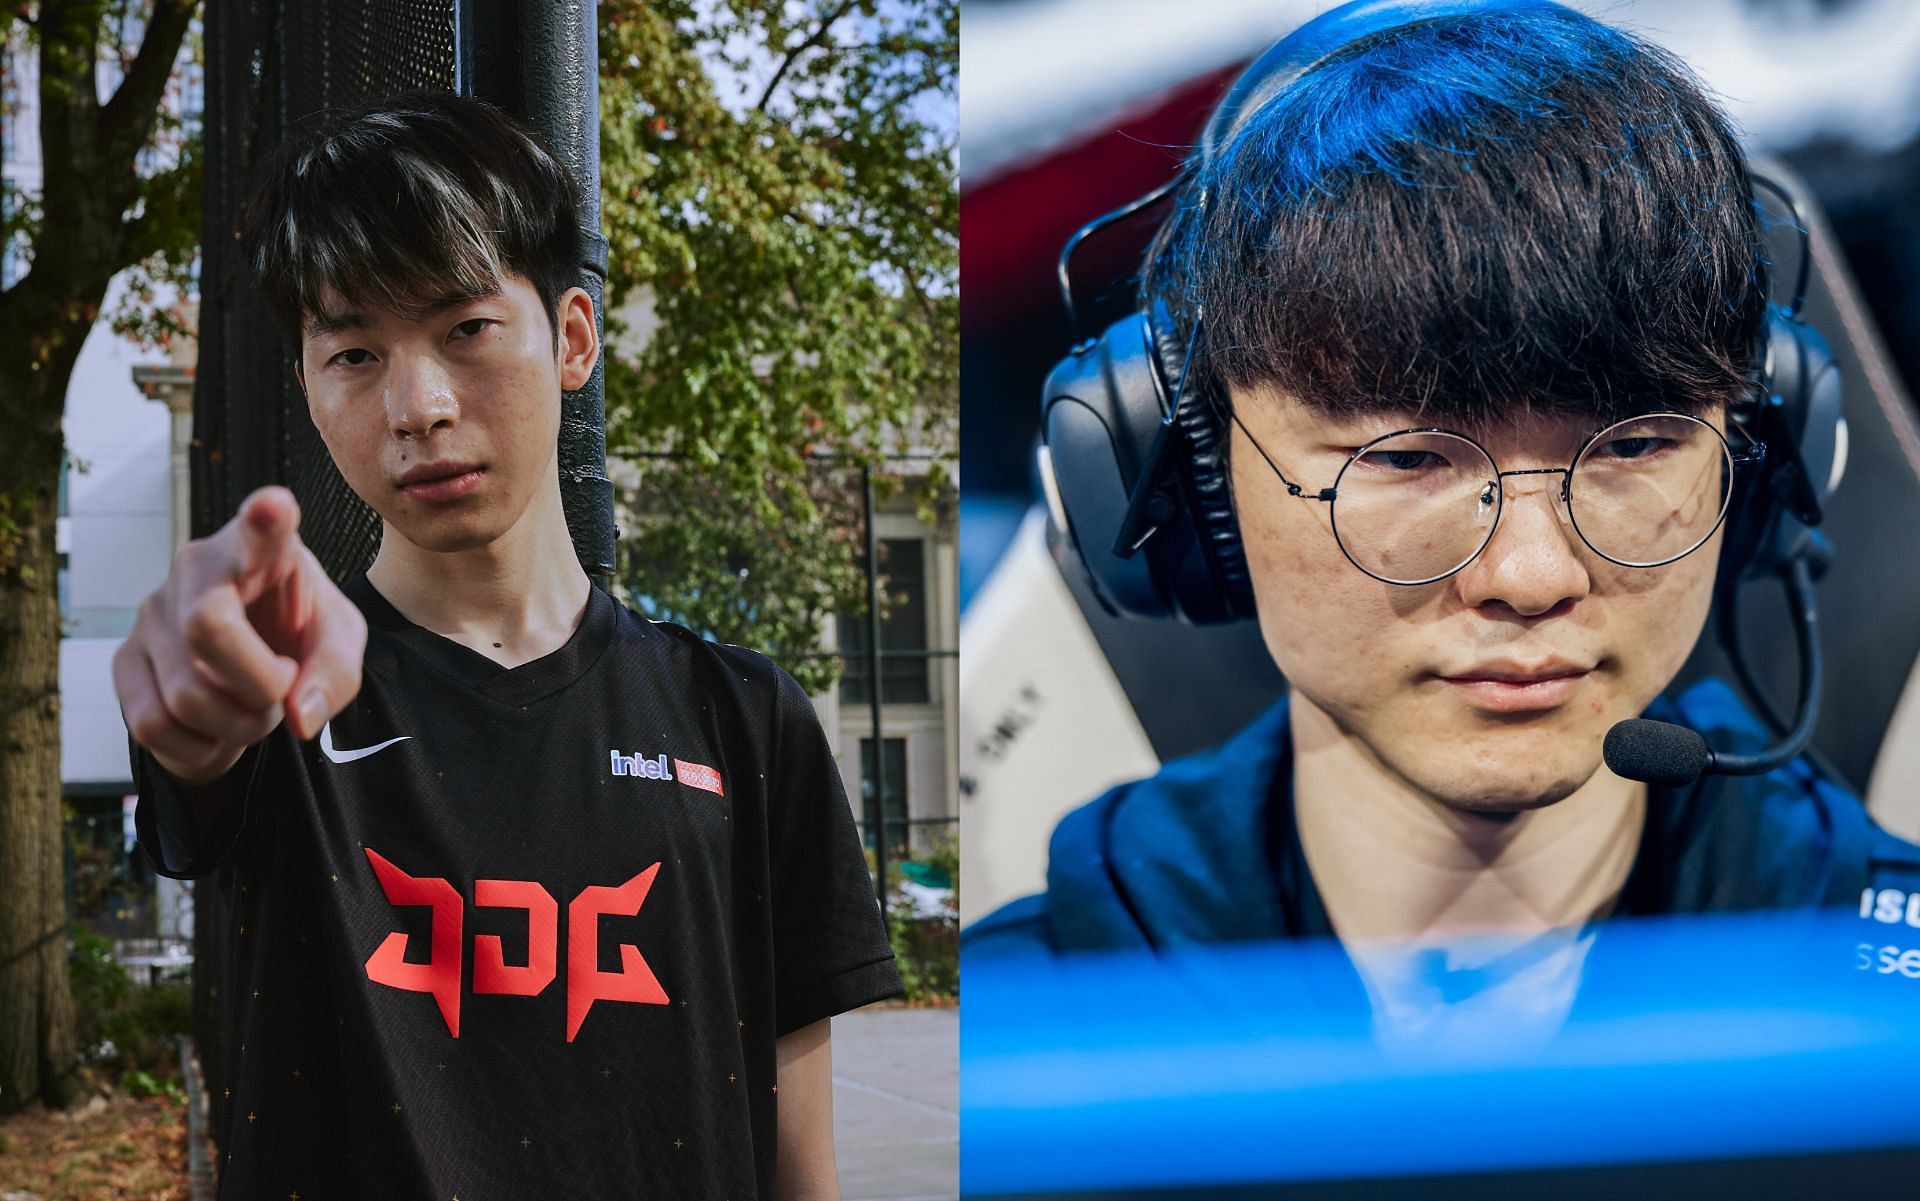 JDG vs T1 will be a really exciting game at Worlds 2022 (Image via Riot Games)